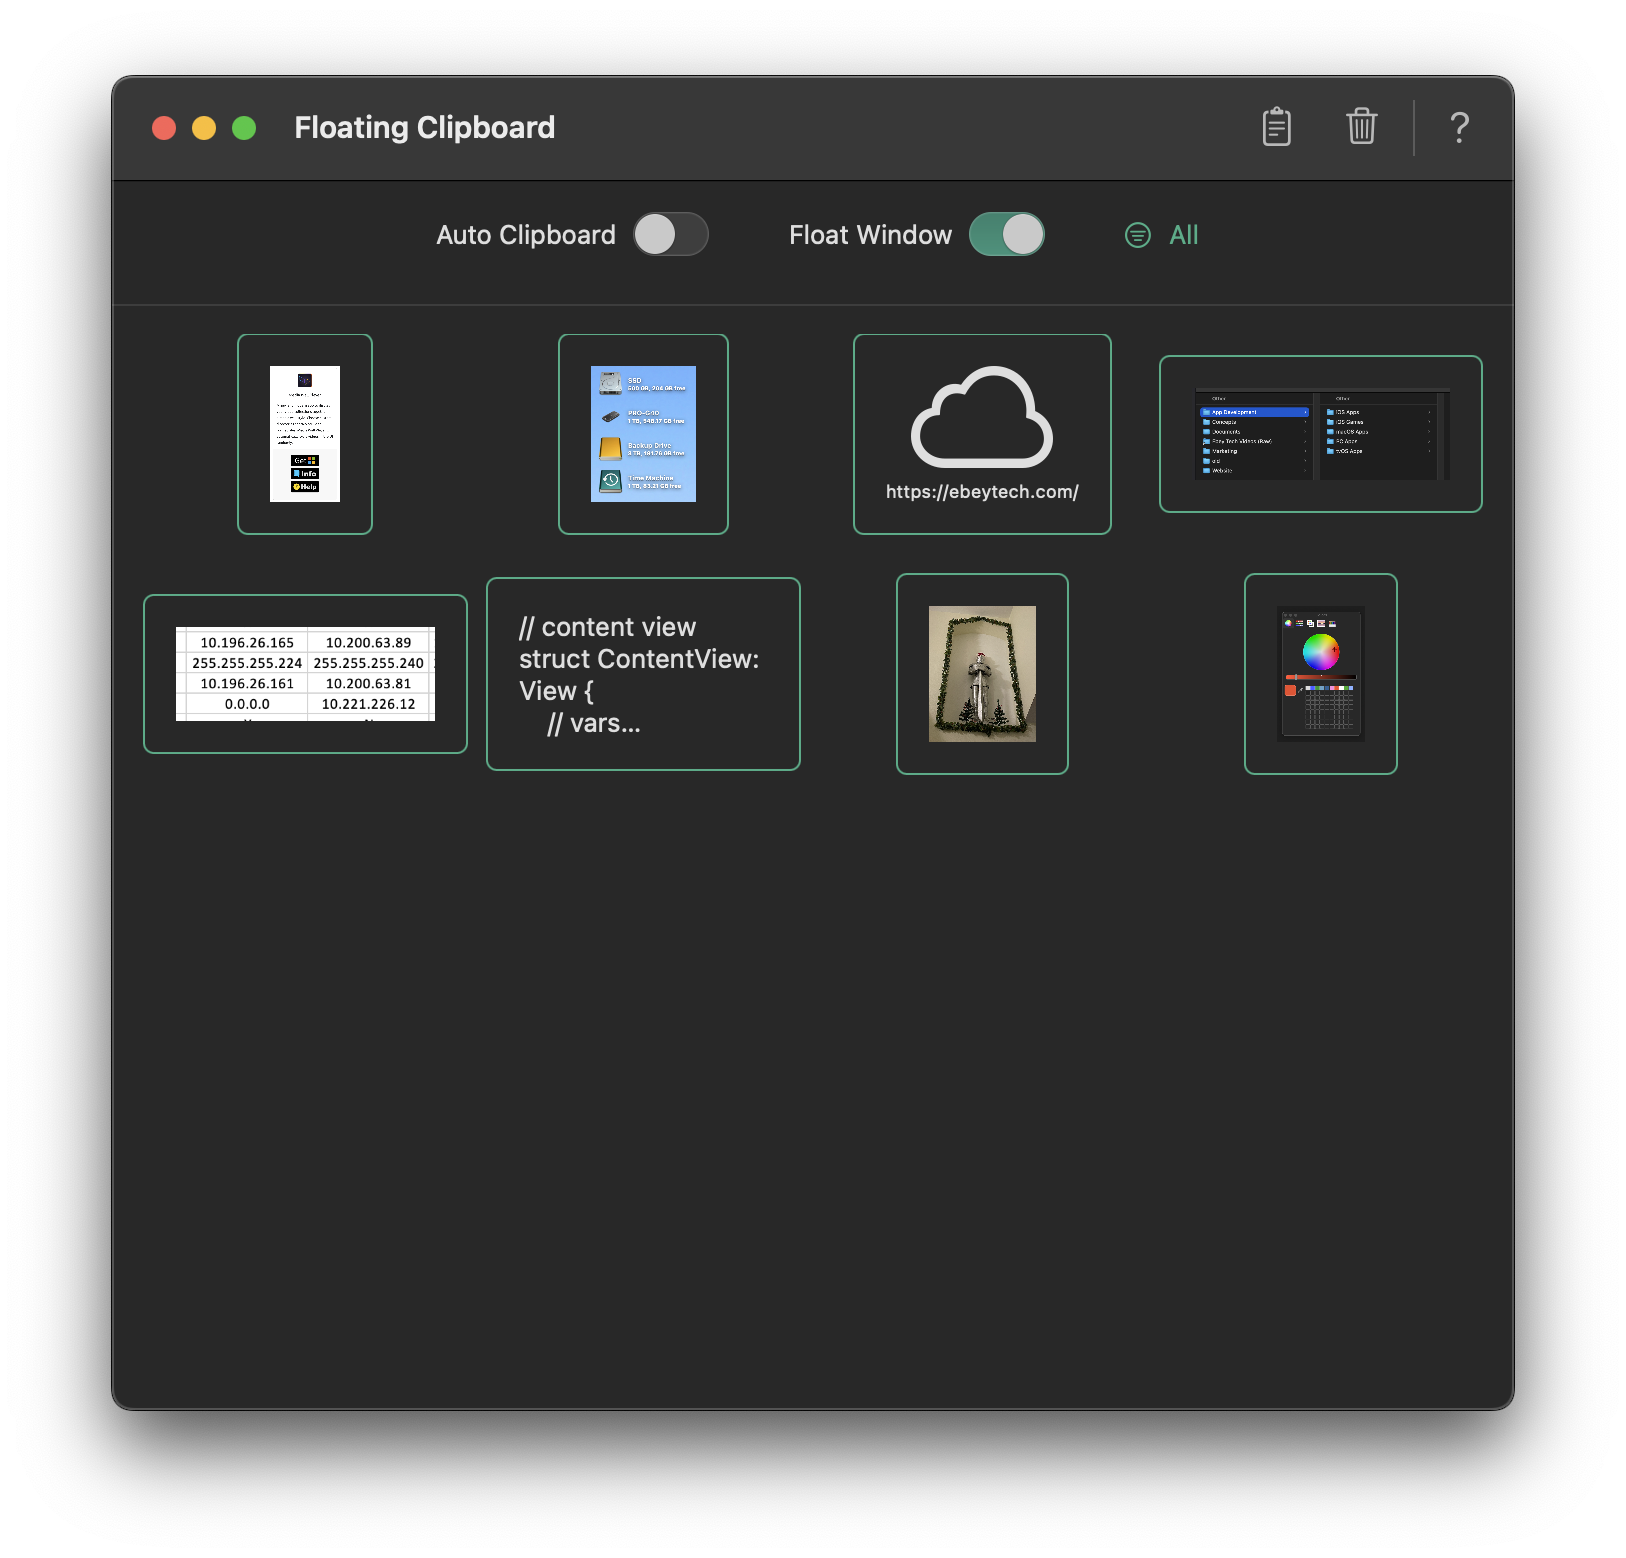 Clipboard History Manager for macOS - Floating Clipboard